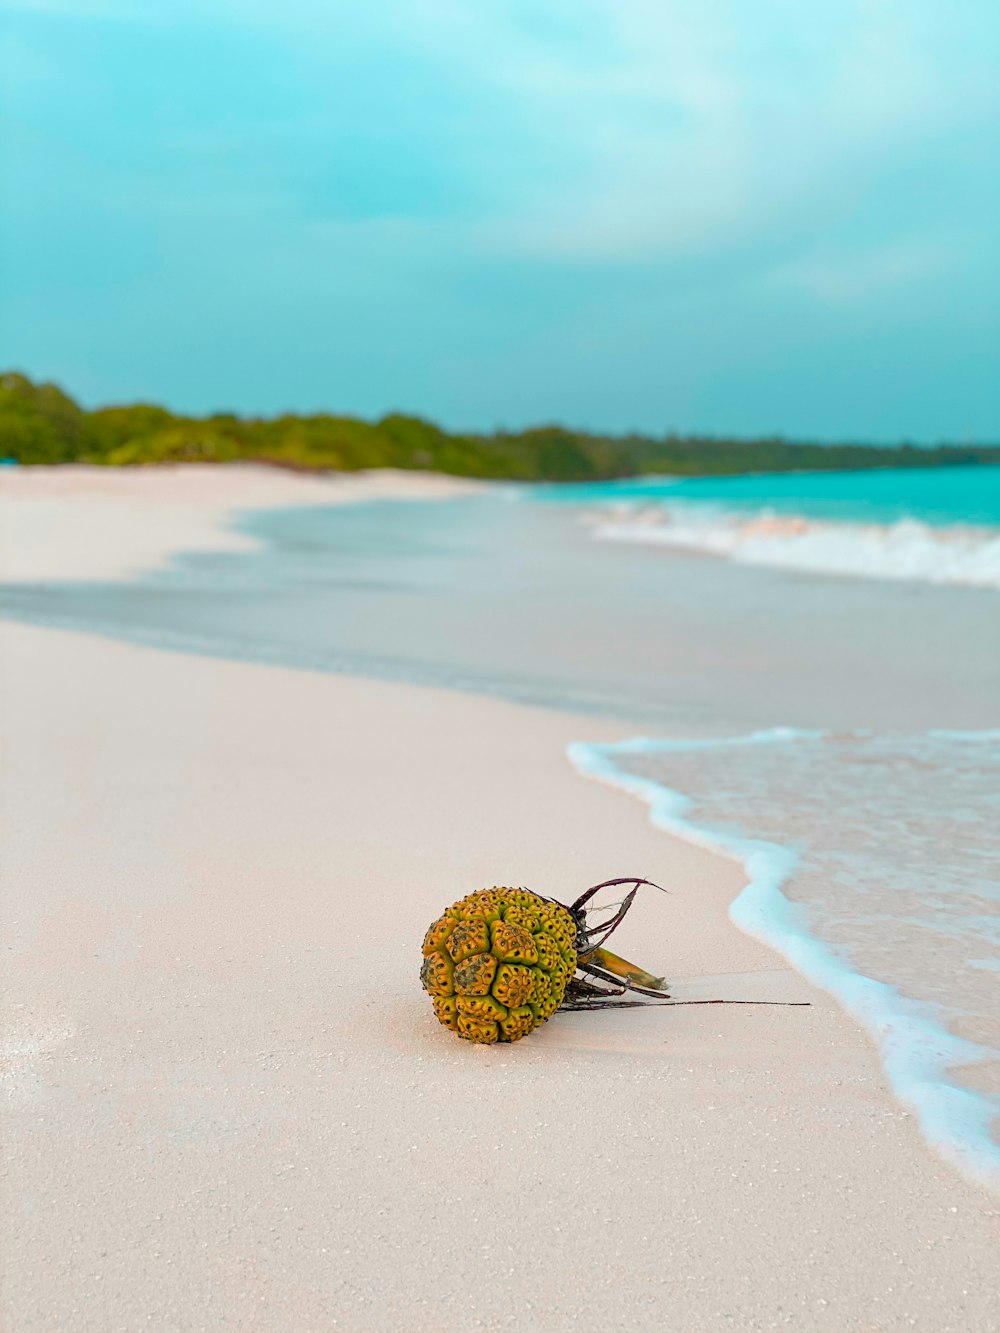 green and brown round fruit on beach during daytime